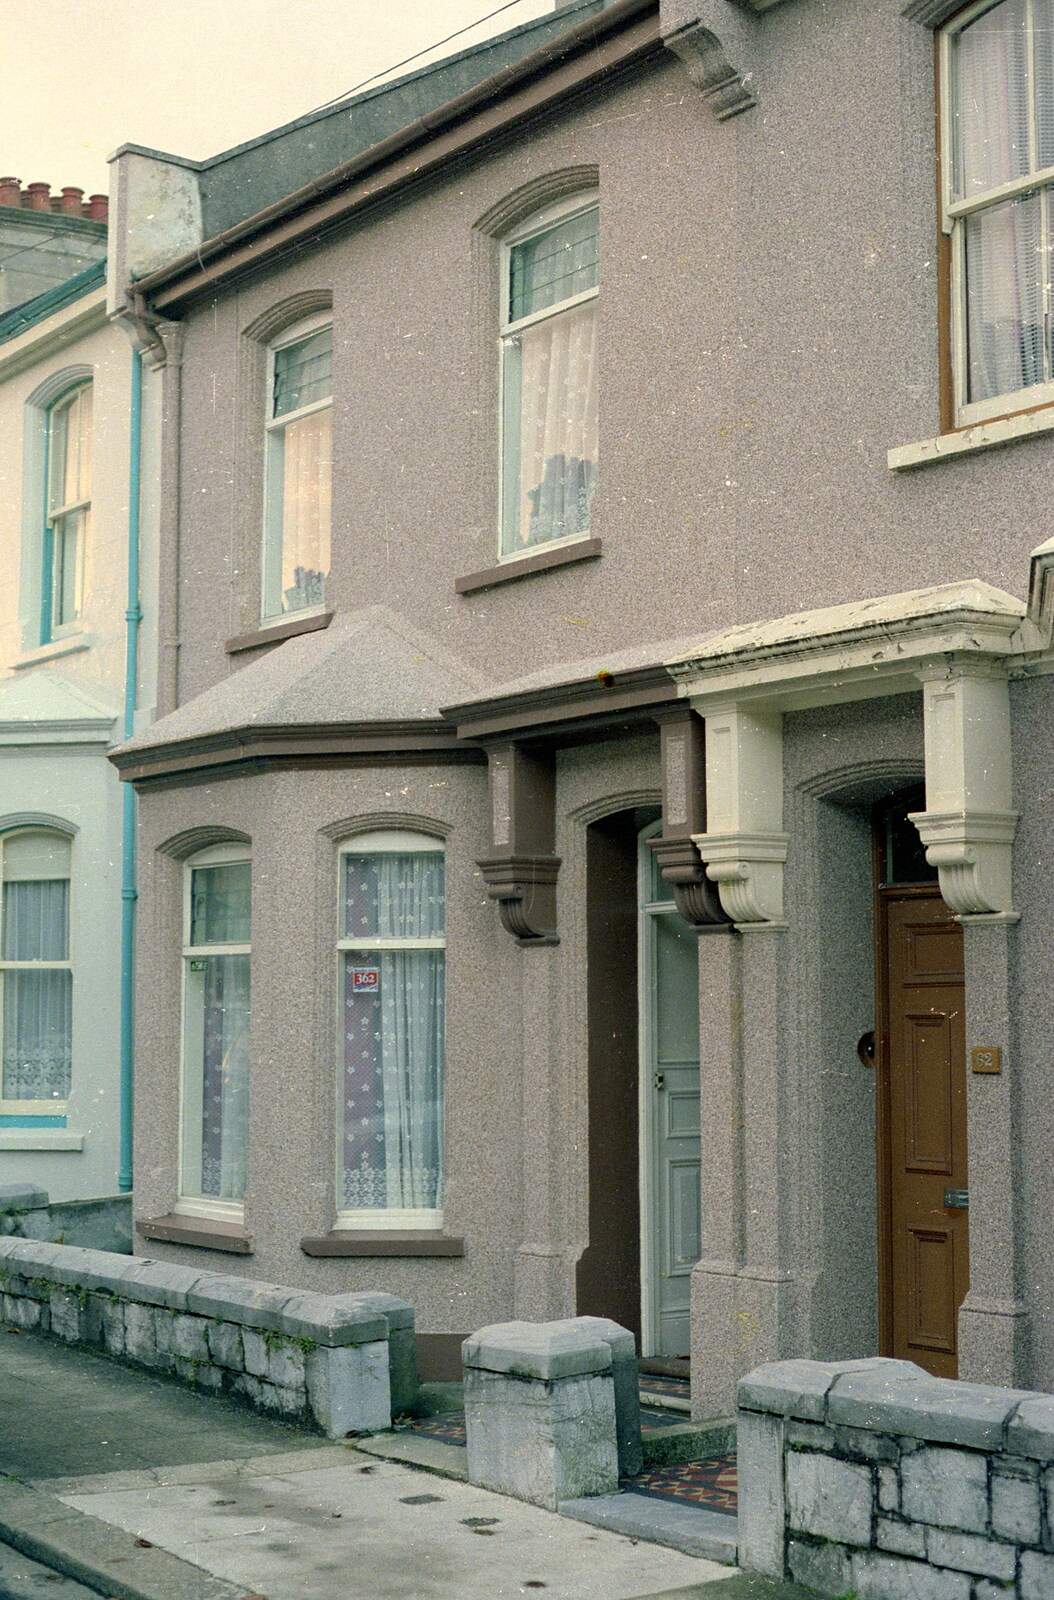 64 Beaumont Street from Uni: First Weeks At Polytechnic, Umbrellas and a Visit From Liz, Plymouth - 26th September 1985